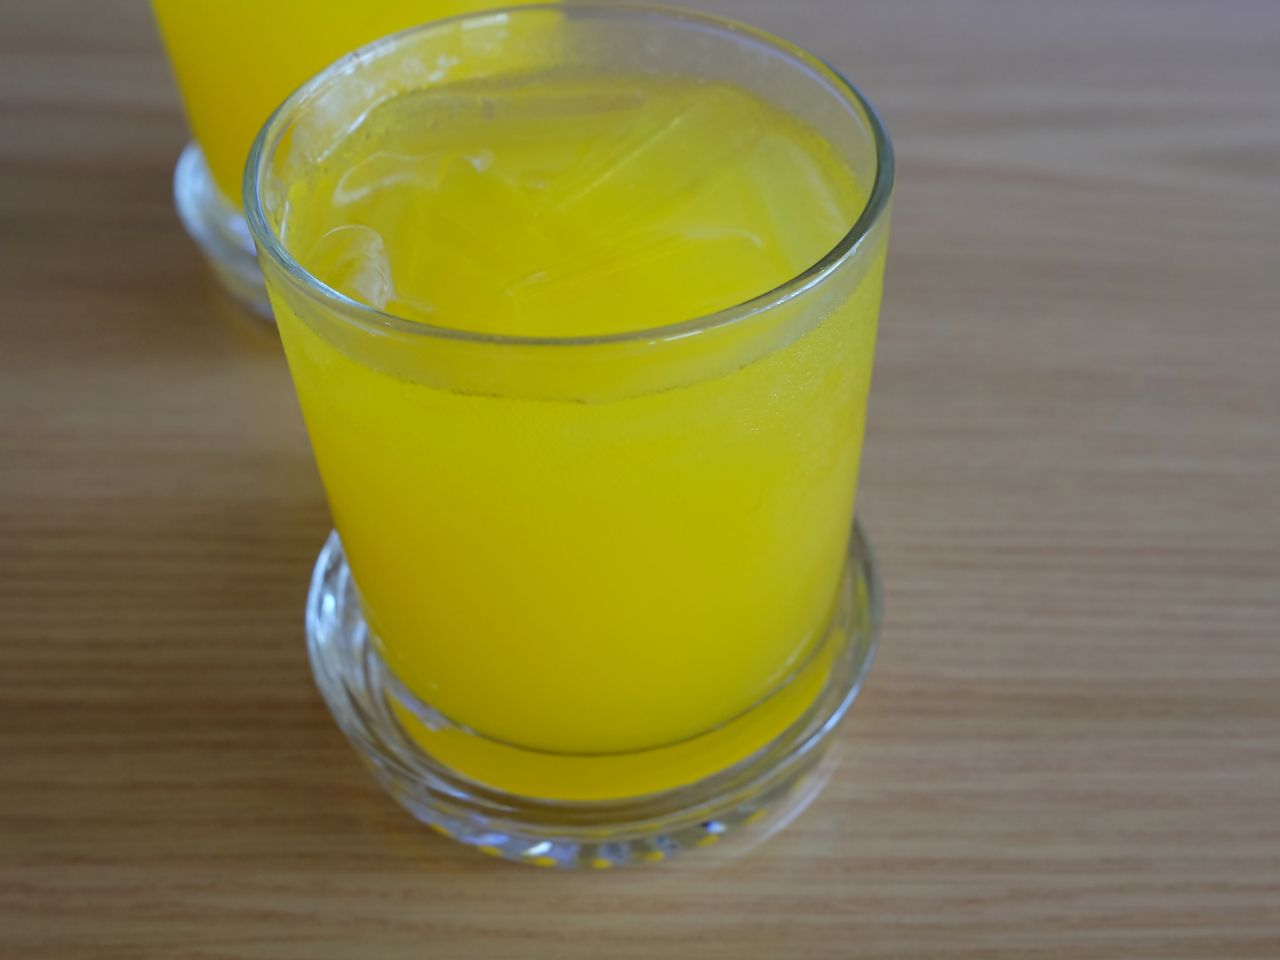 How to make a homemade isotonic drink?